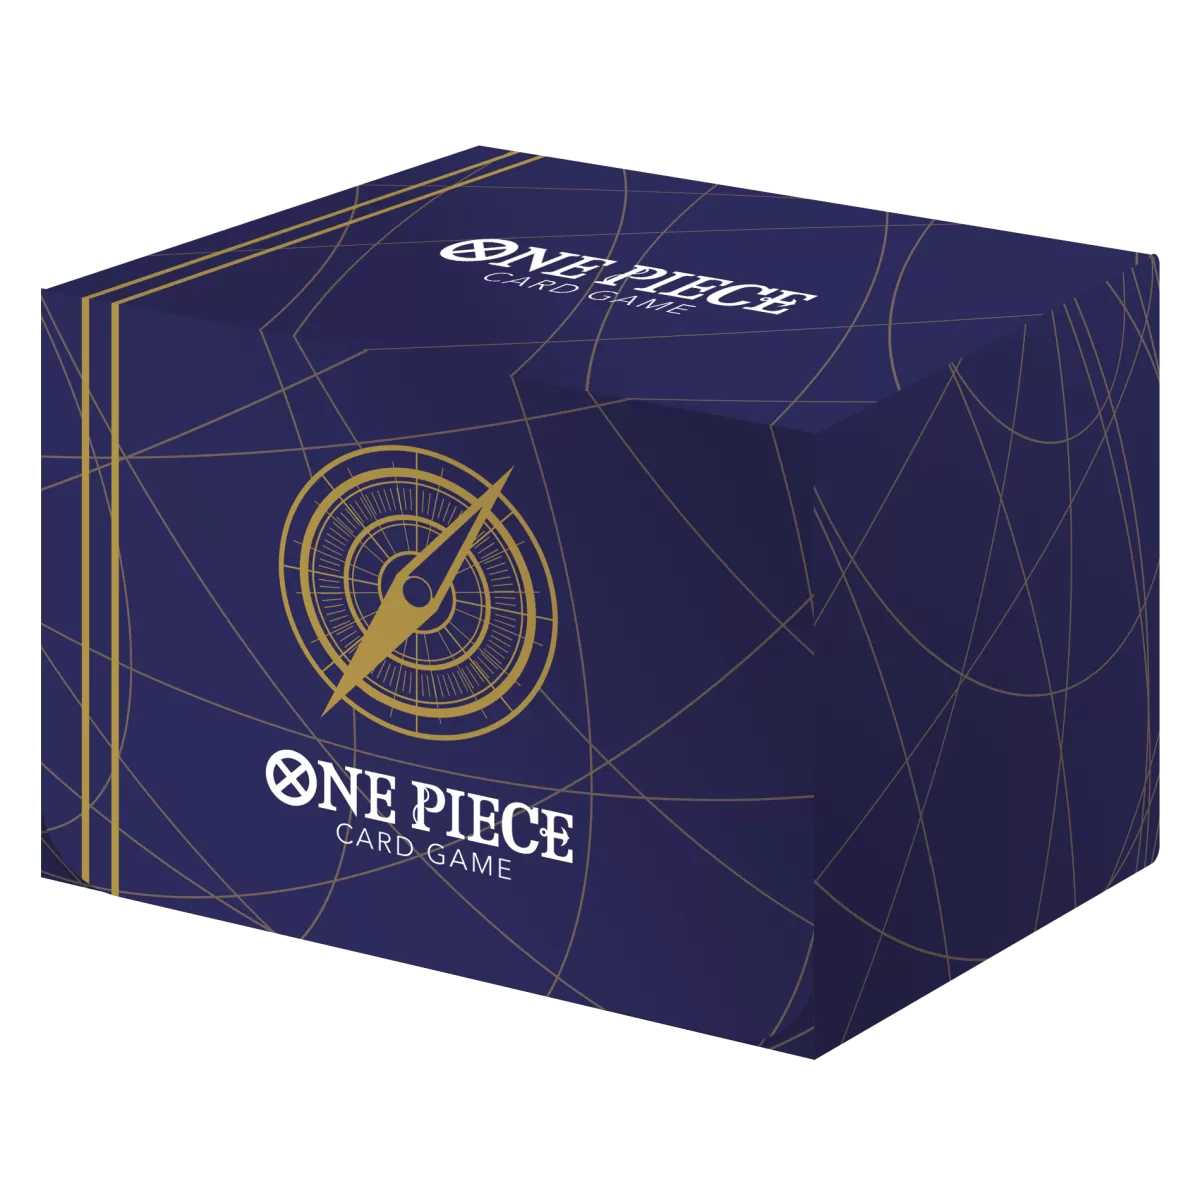 One Piece Card Game Card Case